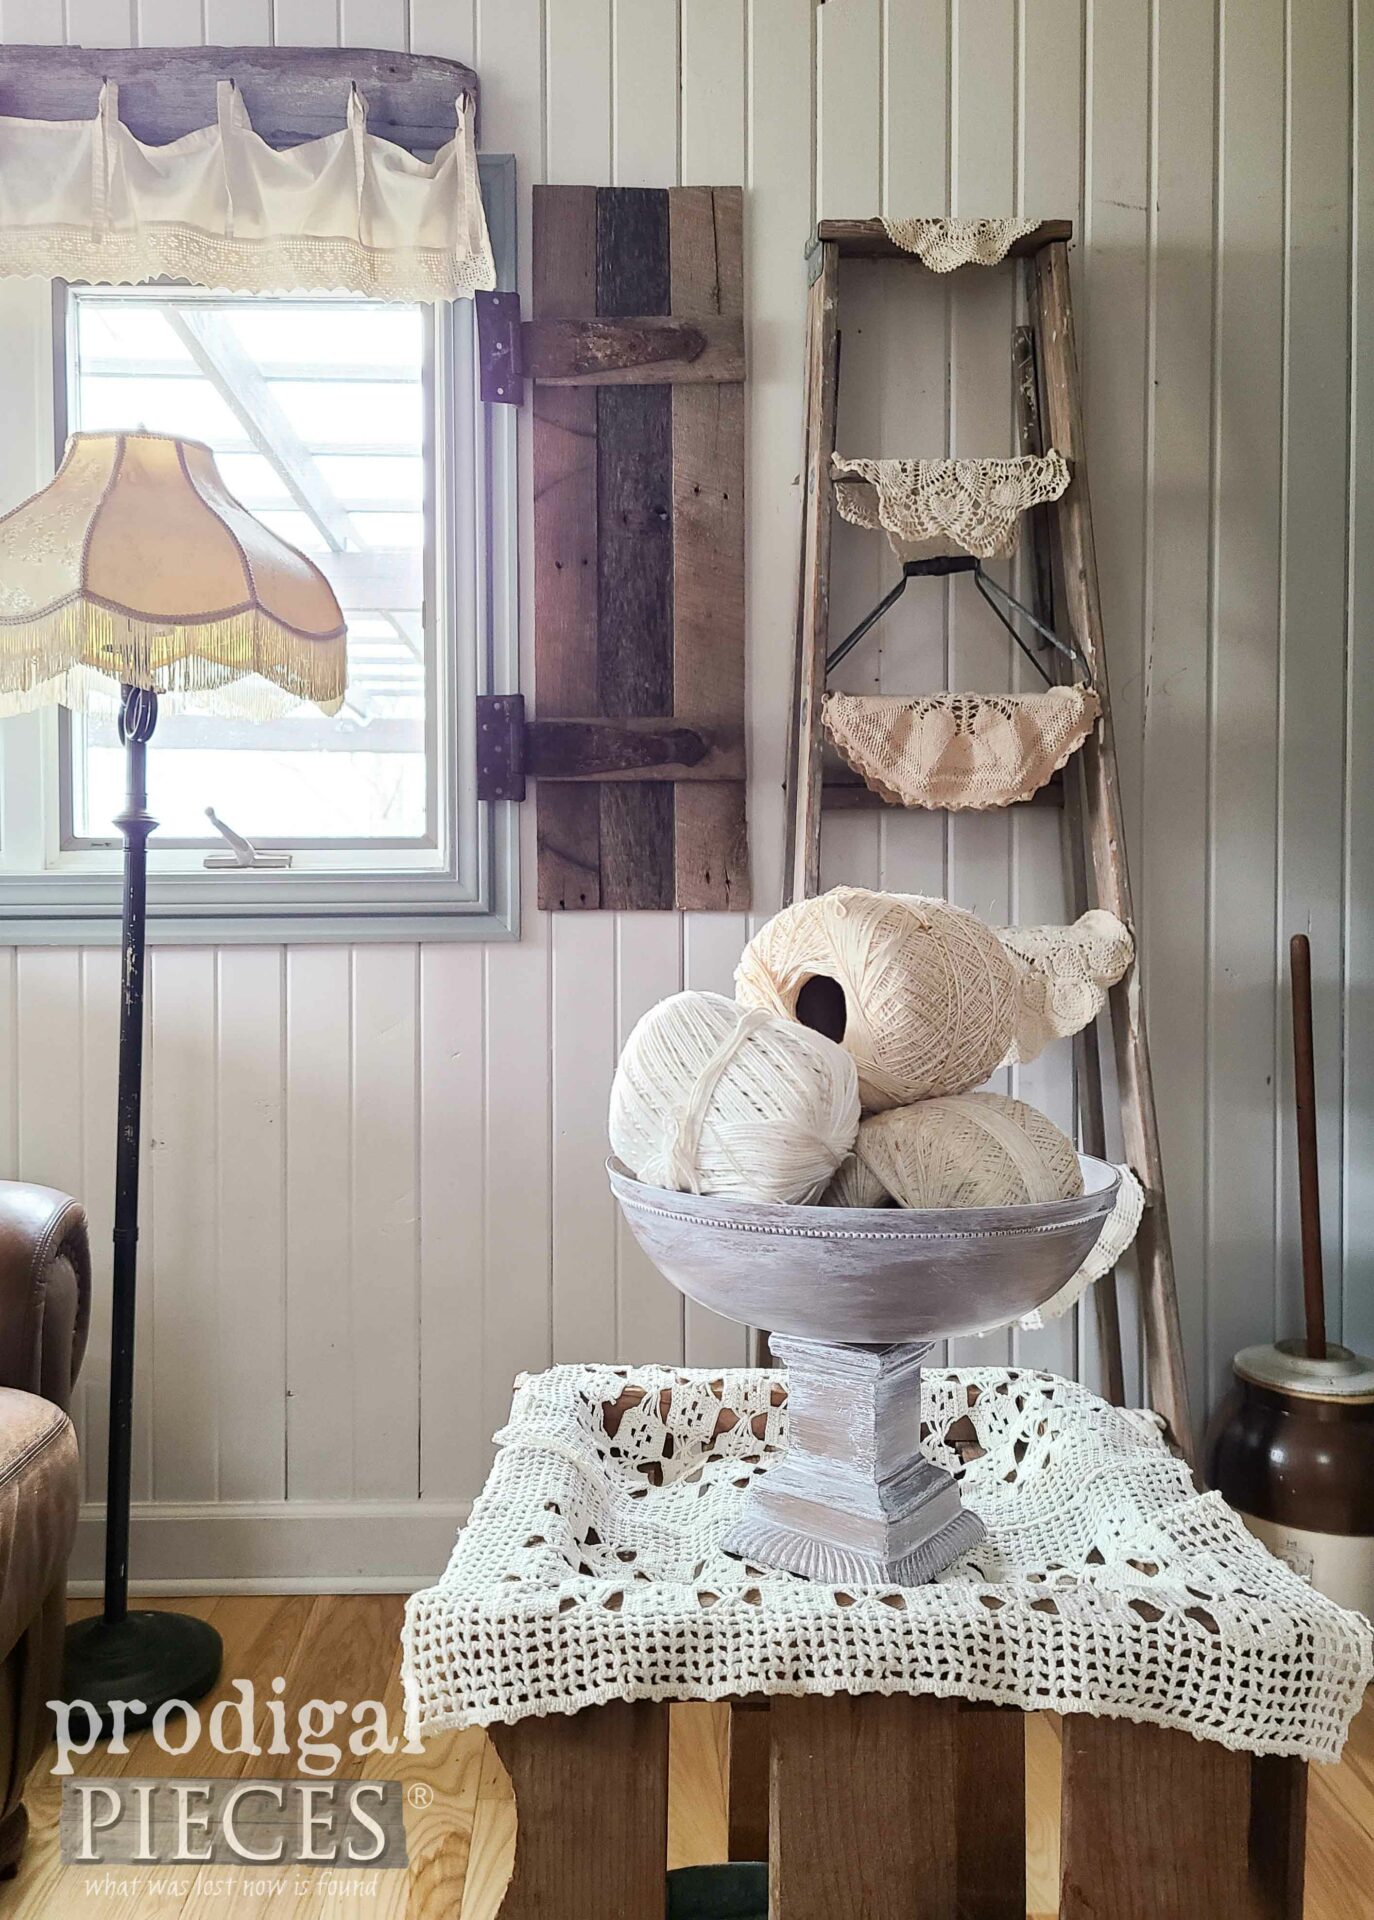 Farmhouse Style Family Room Decor for Thrifty Update by Larissa of Prodigal Pieces | prodigalpieces.com #prodigalpieces #farmhouse #thrifted #diy